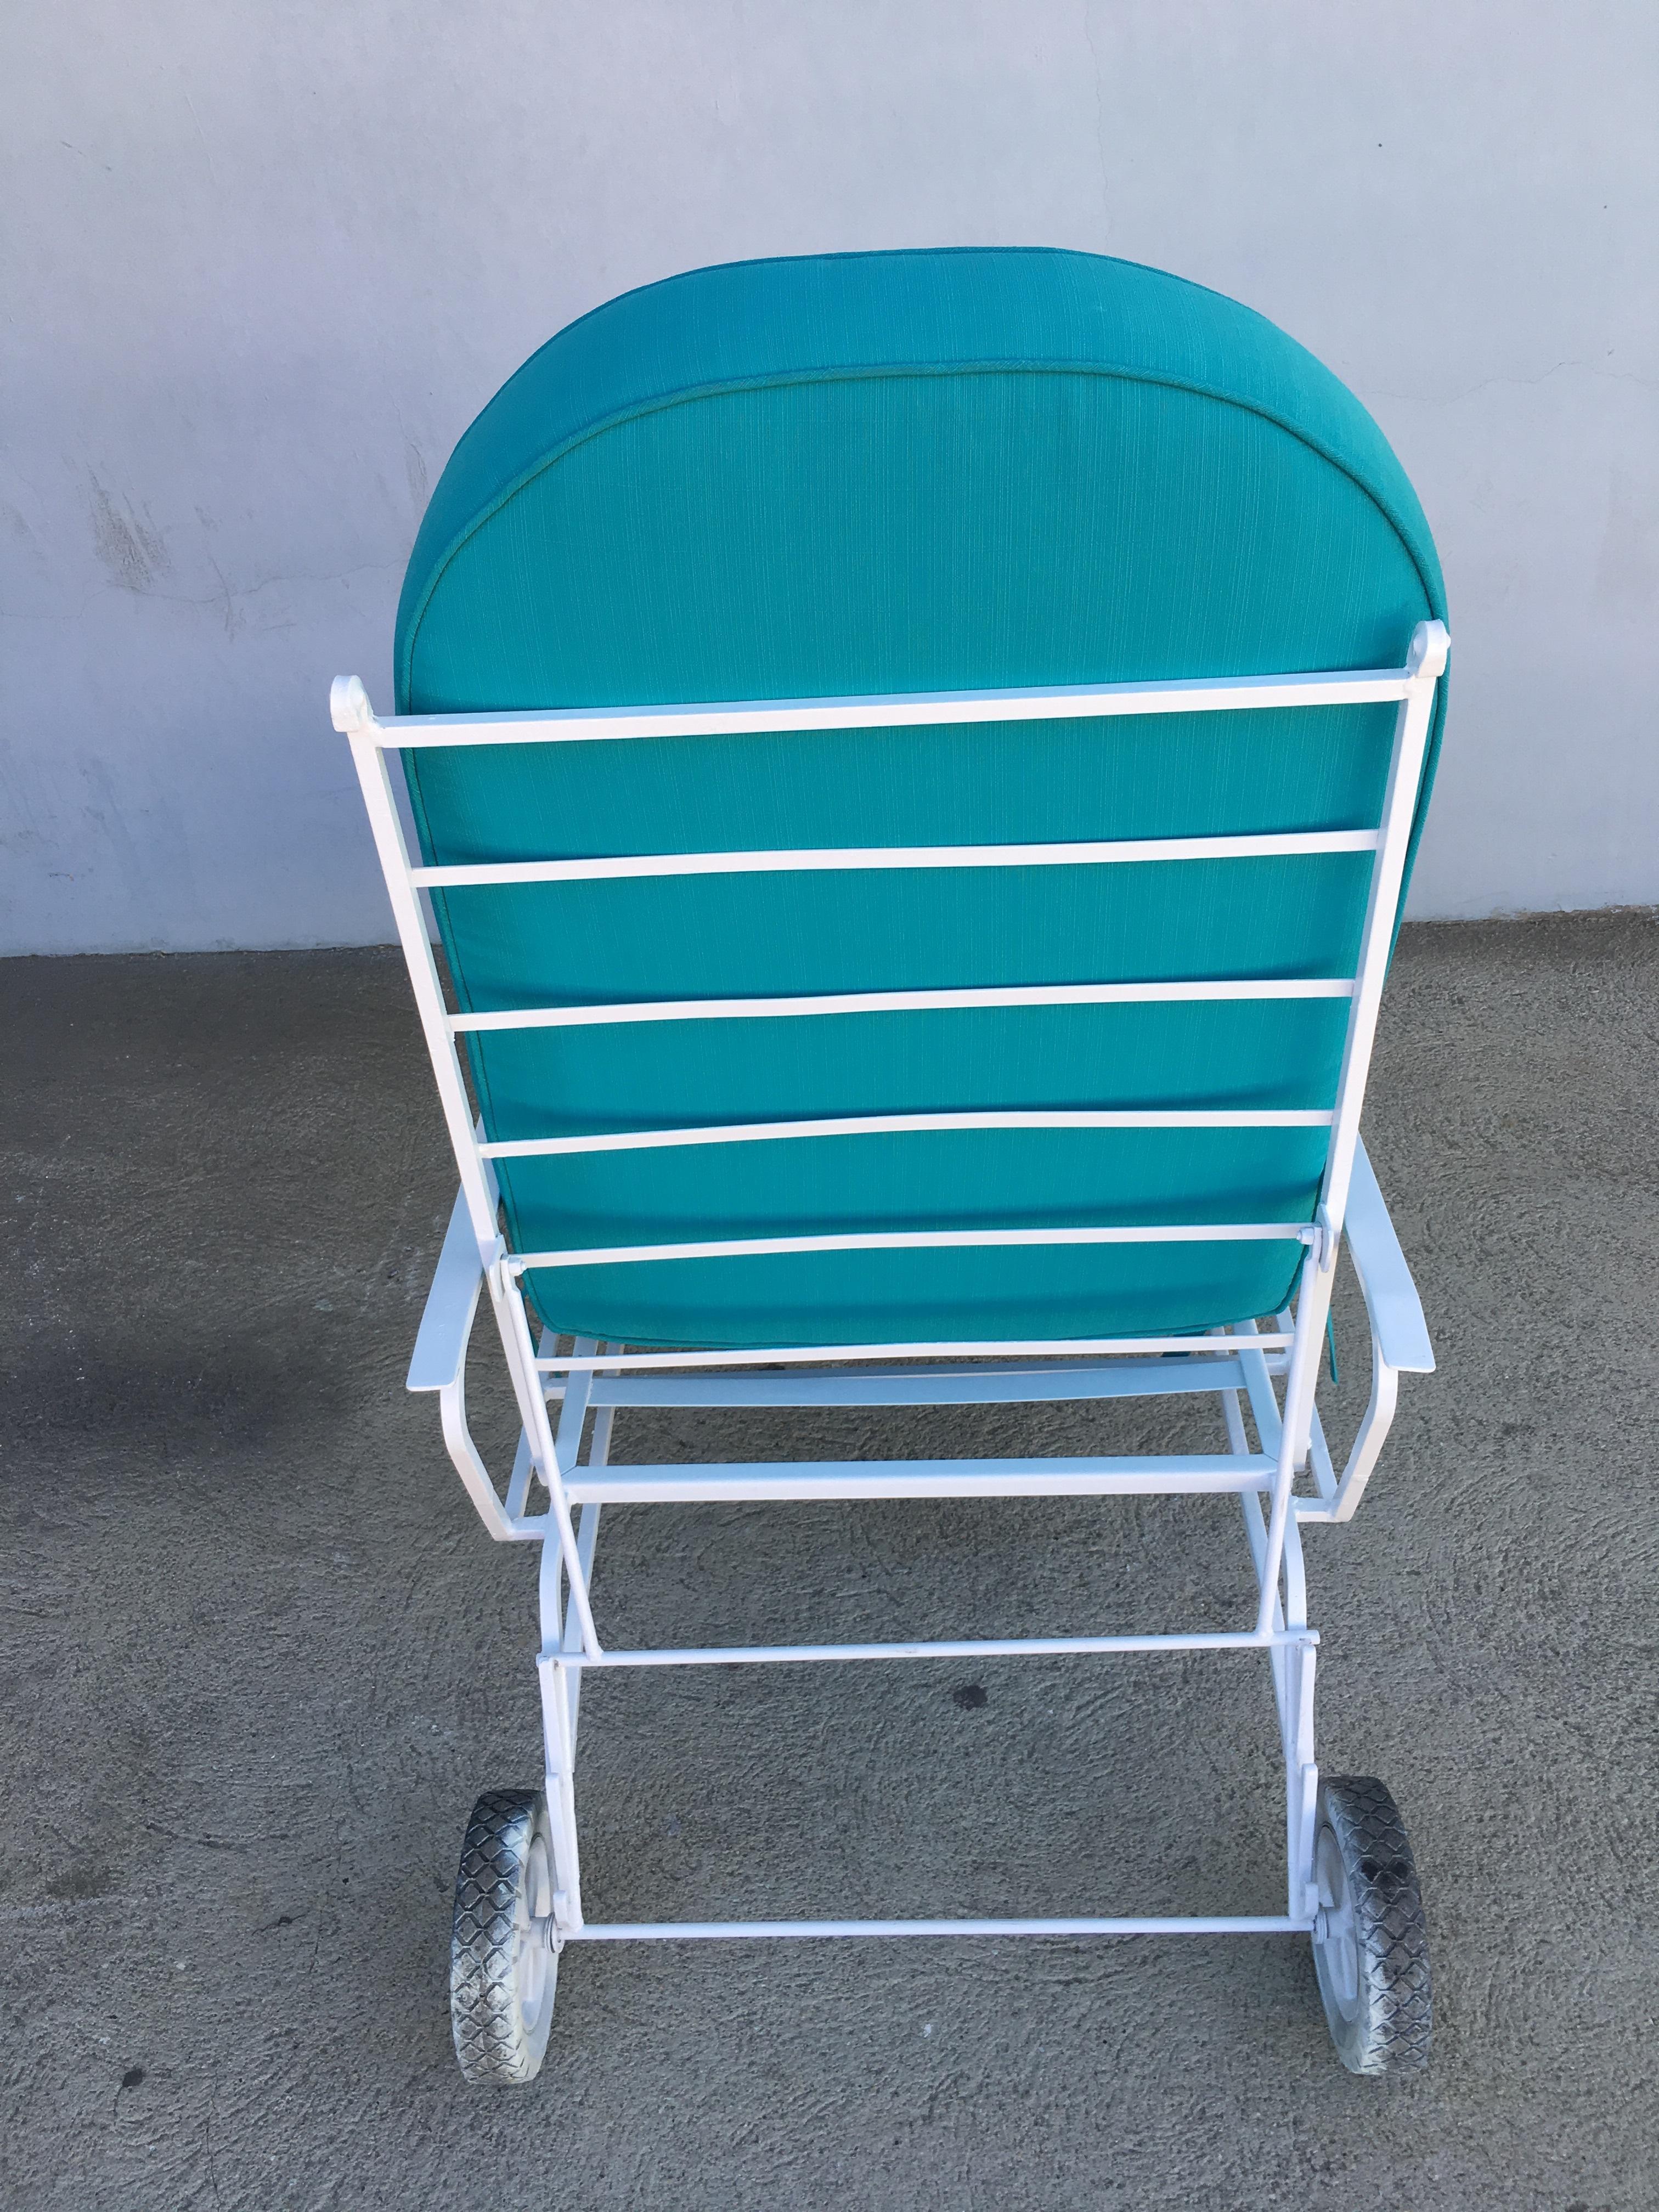 White steel outdoor / patio chaise lounge, produced in 1960 by the Woodard Furniture Company. This comfortable and stylish vintage chaise lounge features a fully adjustable reclining back and back wheels for easy moving. Cushions made to order